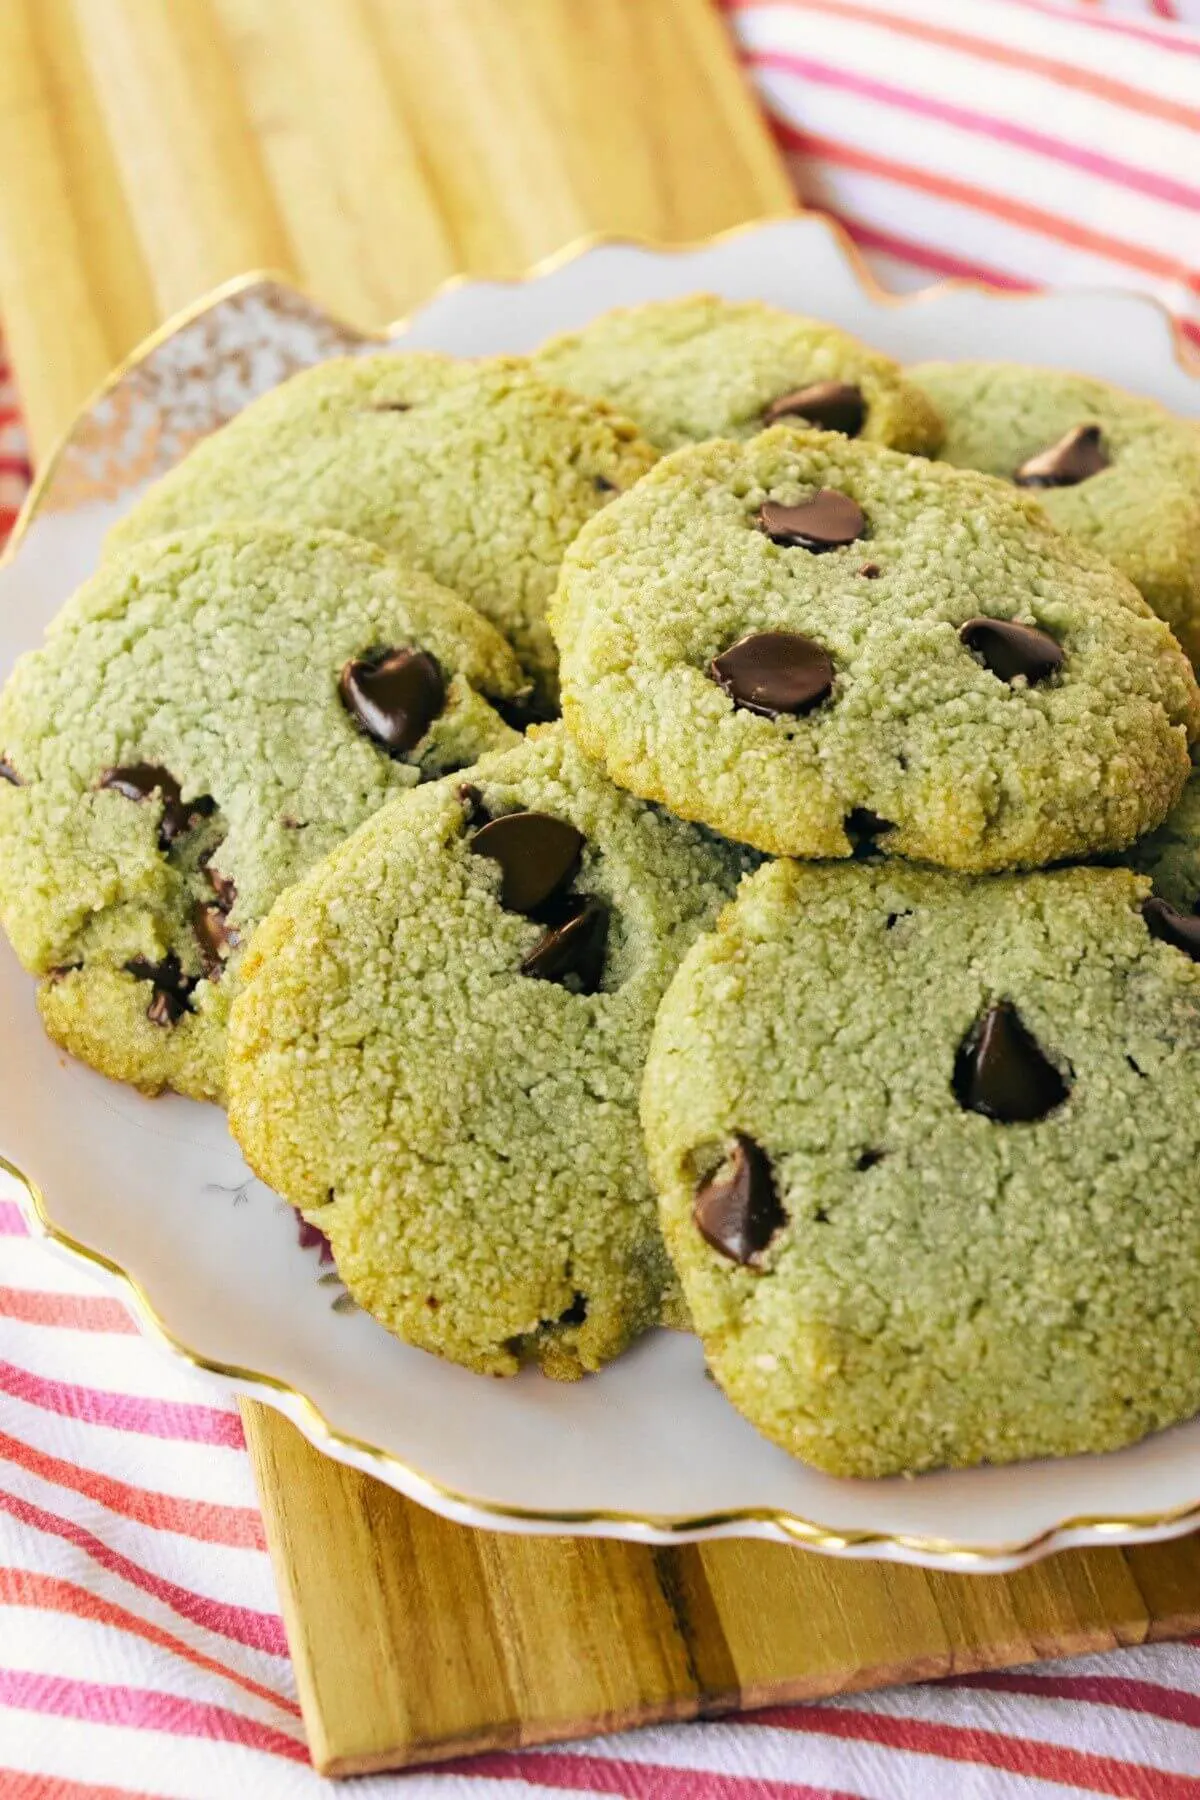 A plate of gluten free matcha cookies sitting on a wooden board